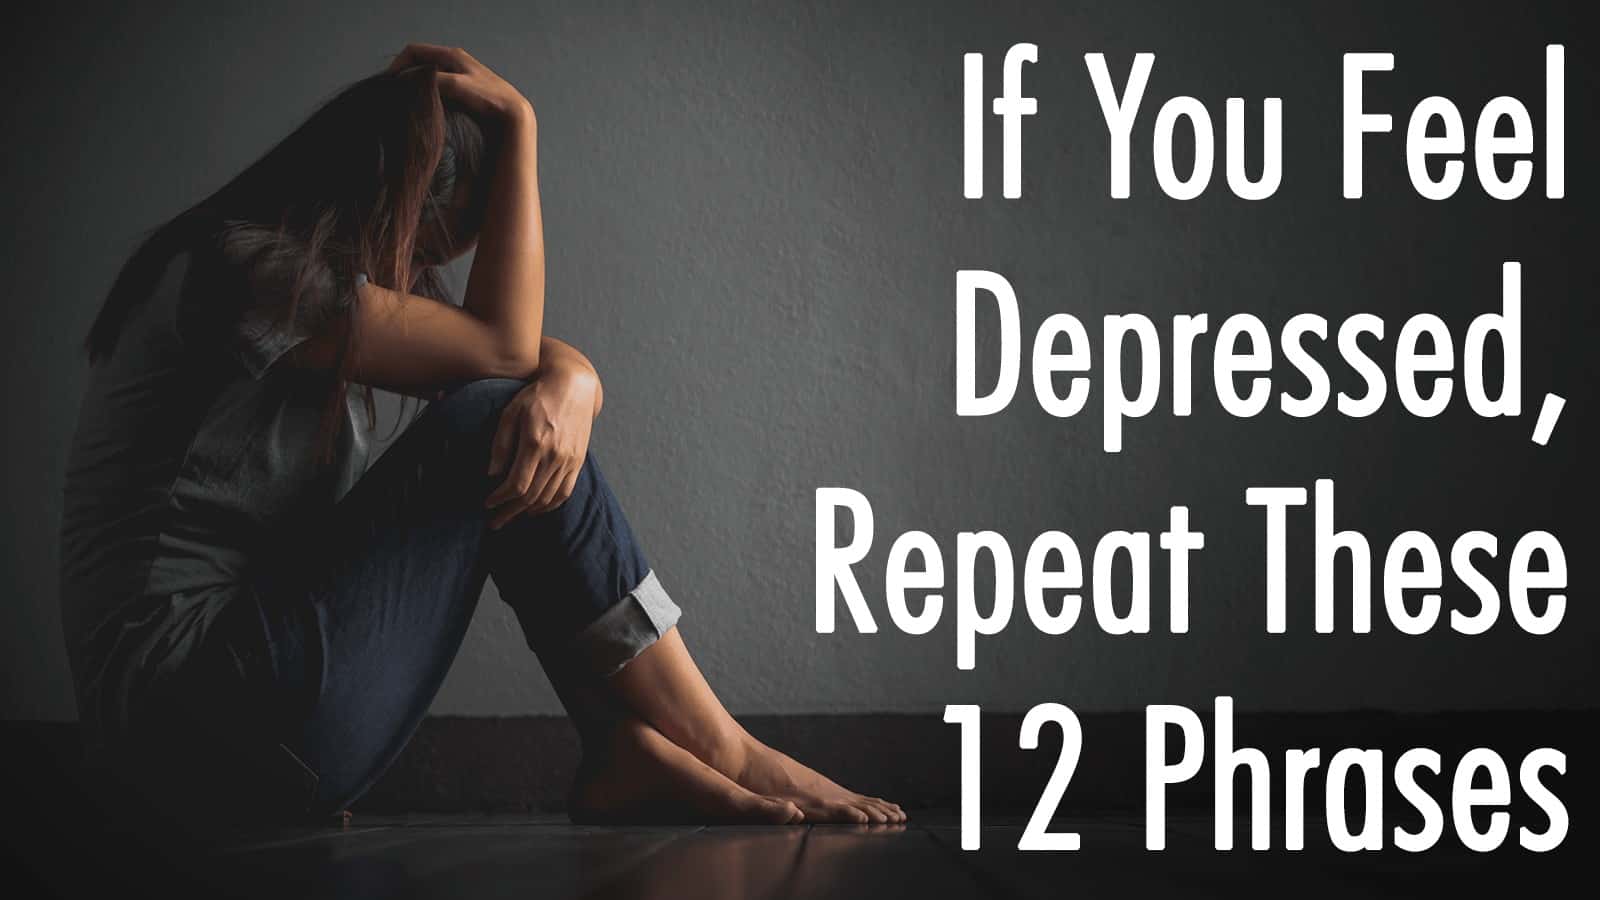 If You Feel Depressed, Repeat These 12 Phrases